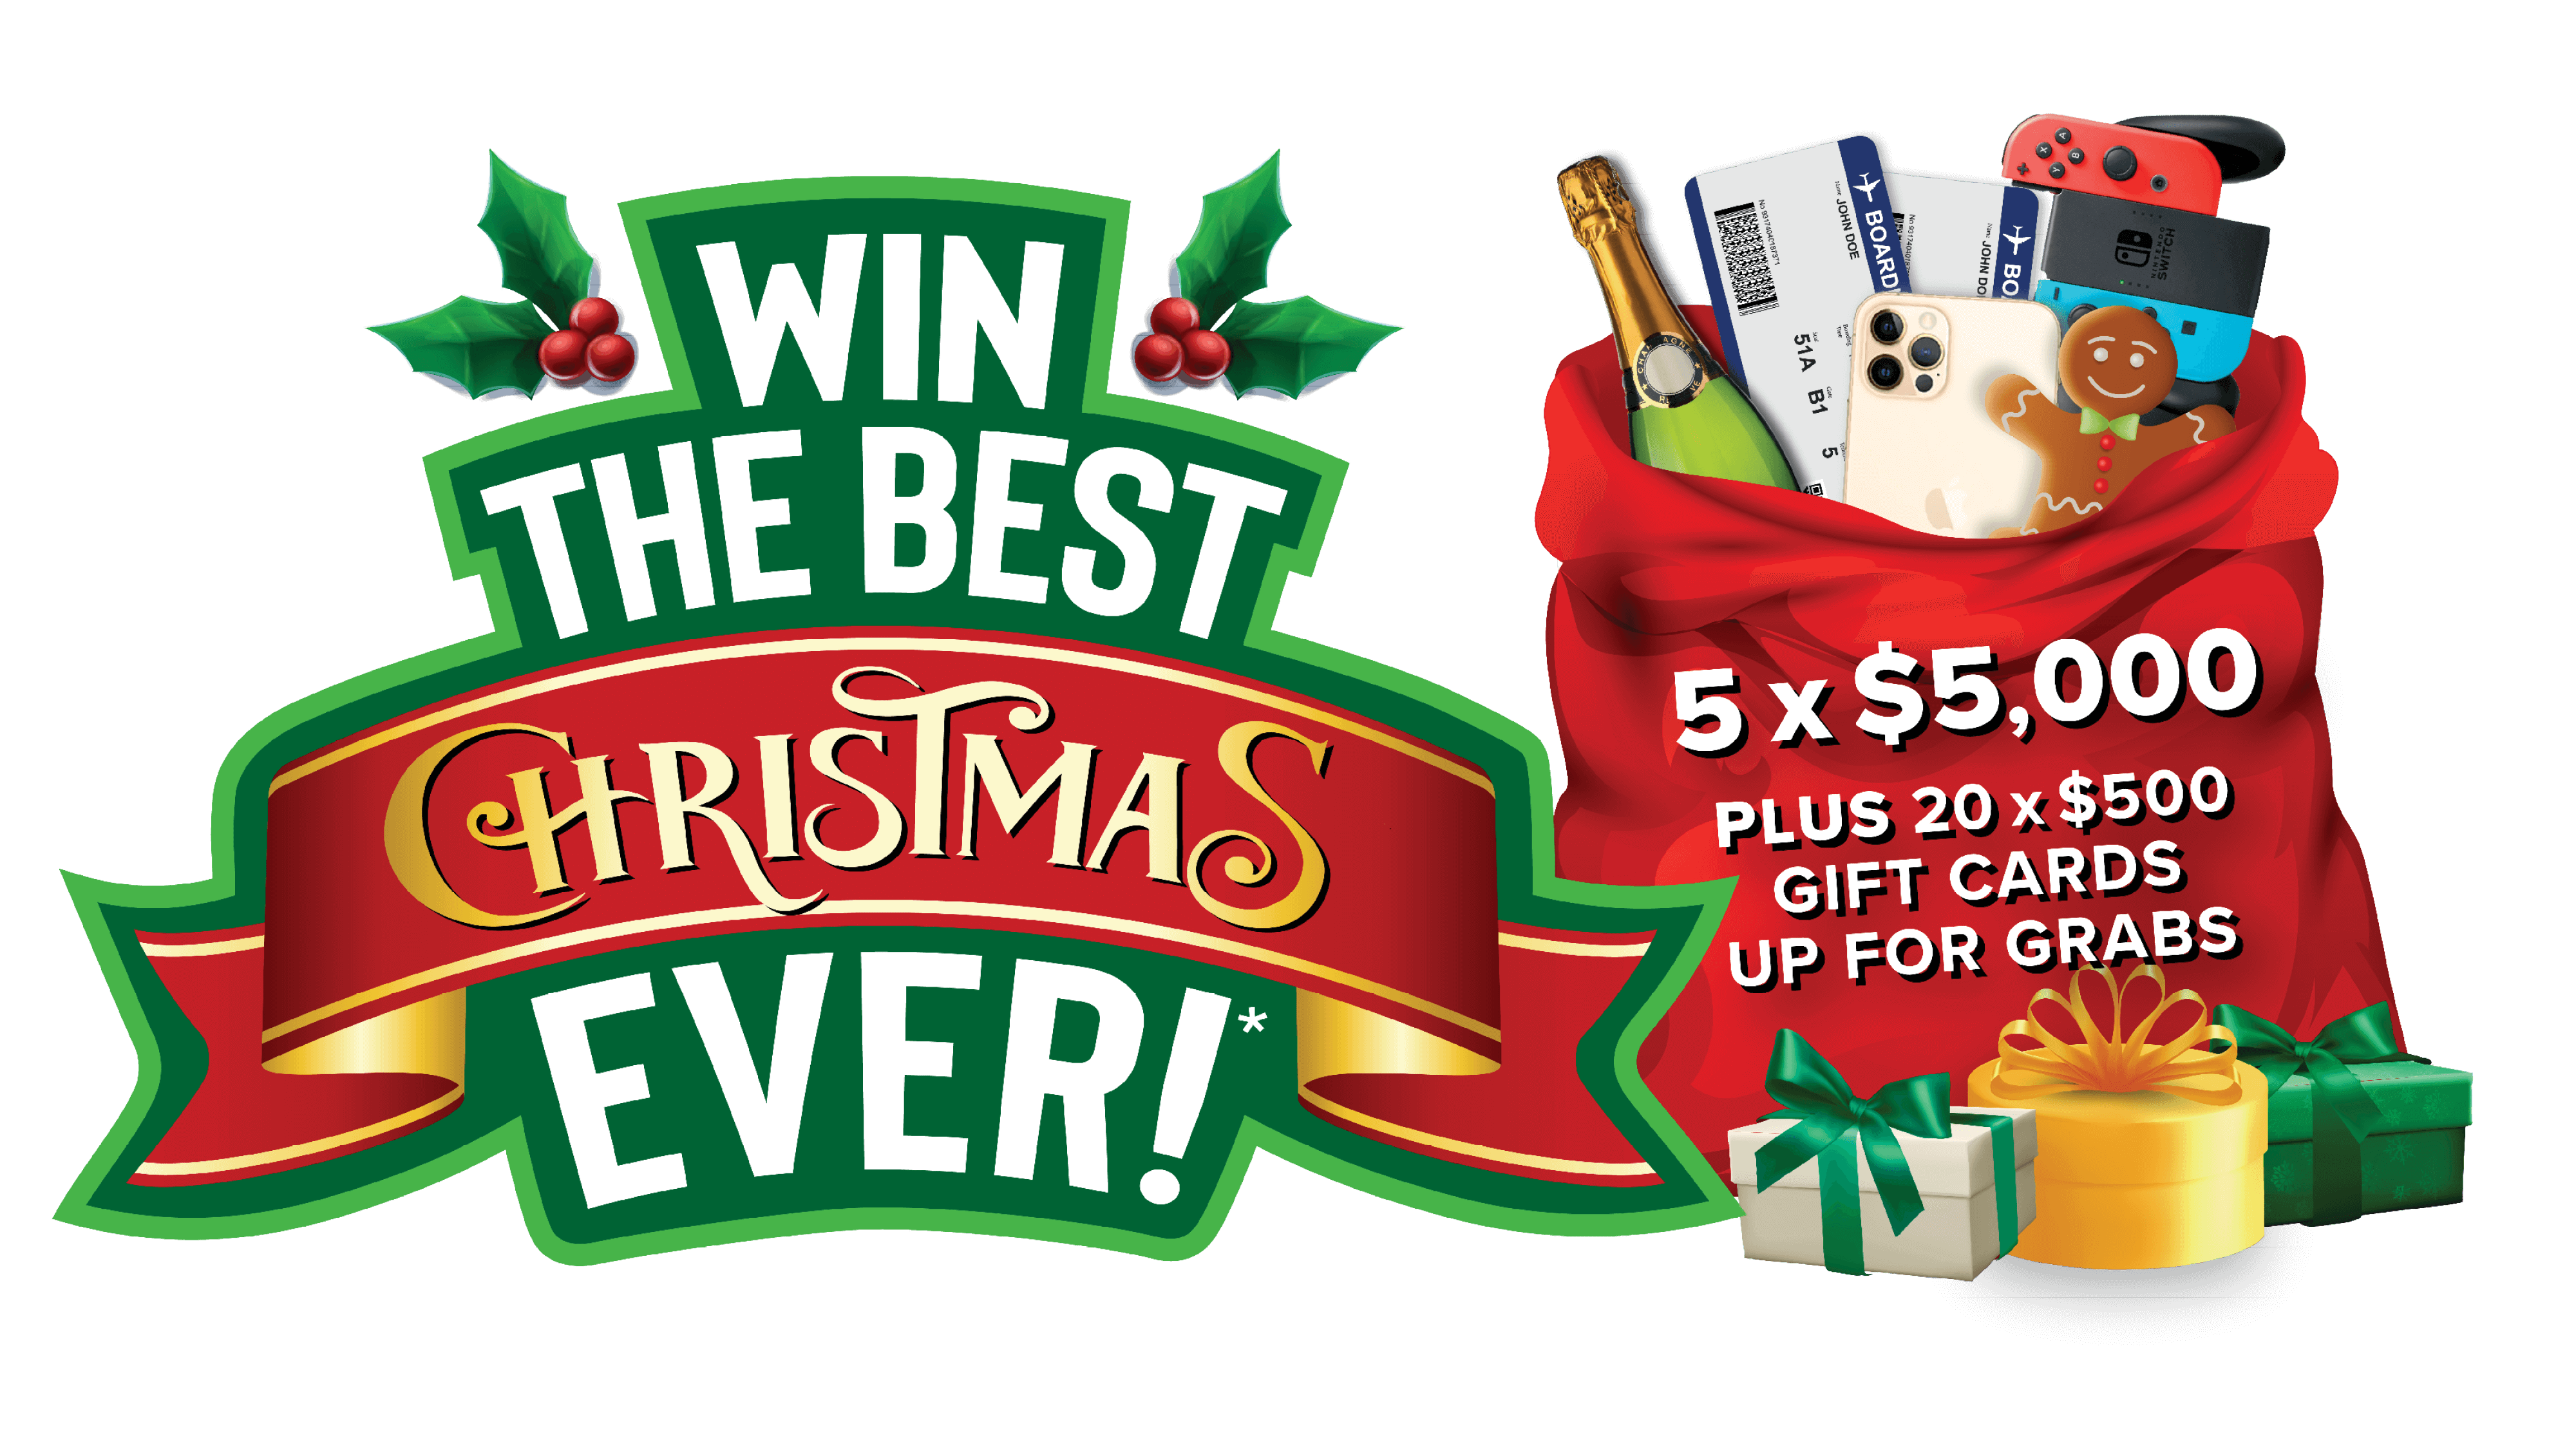 Win the BEST CHRISTMAS EVER!